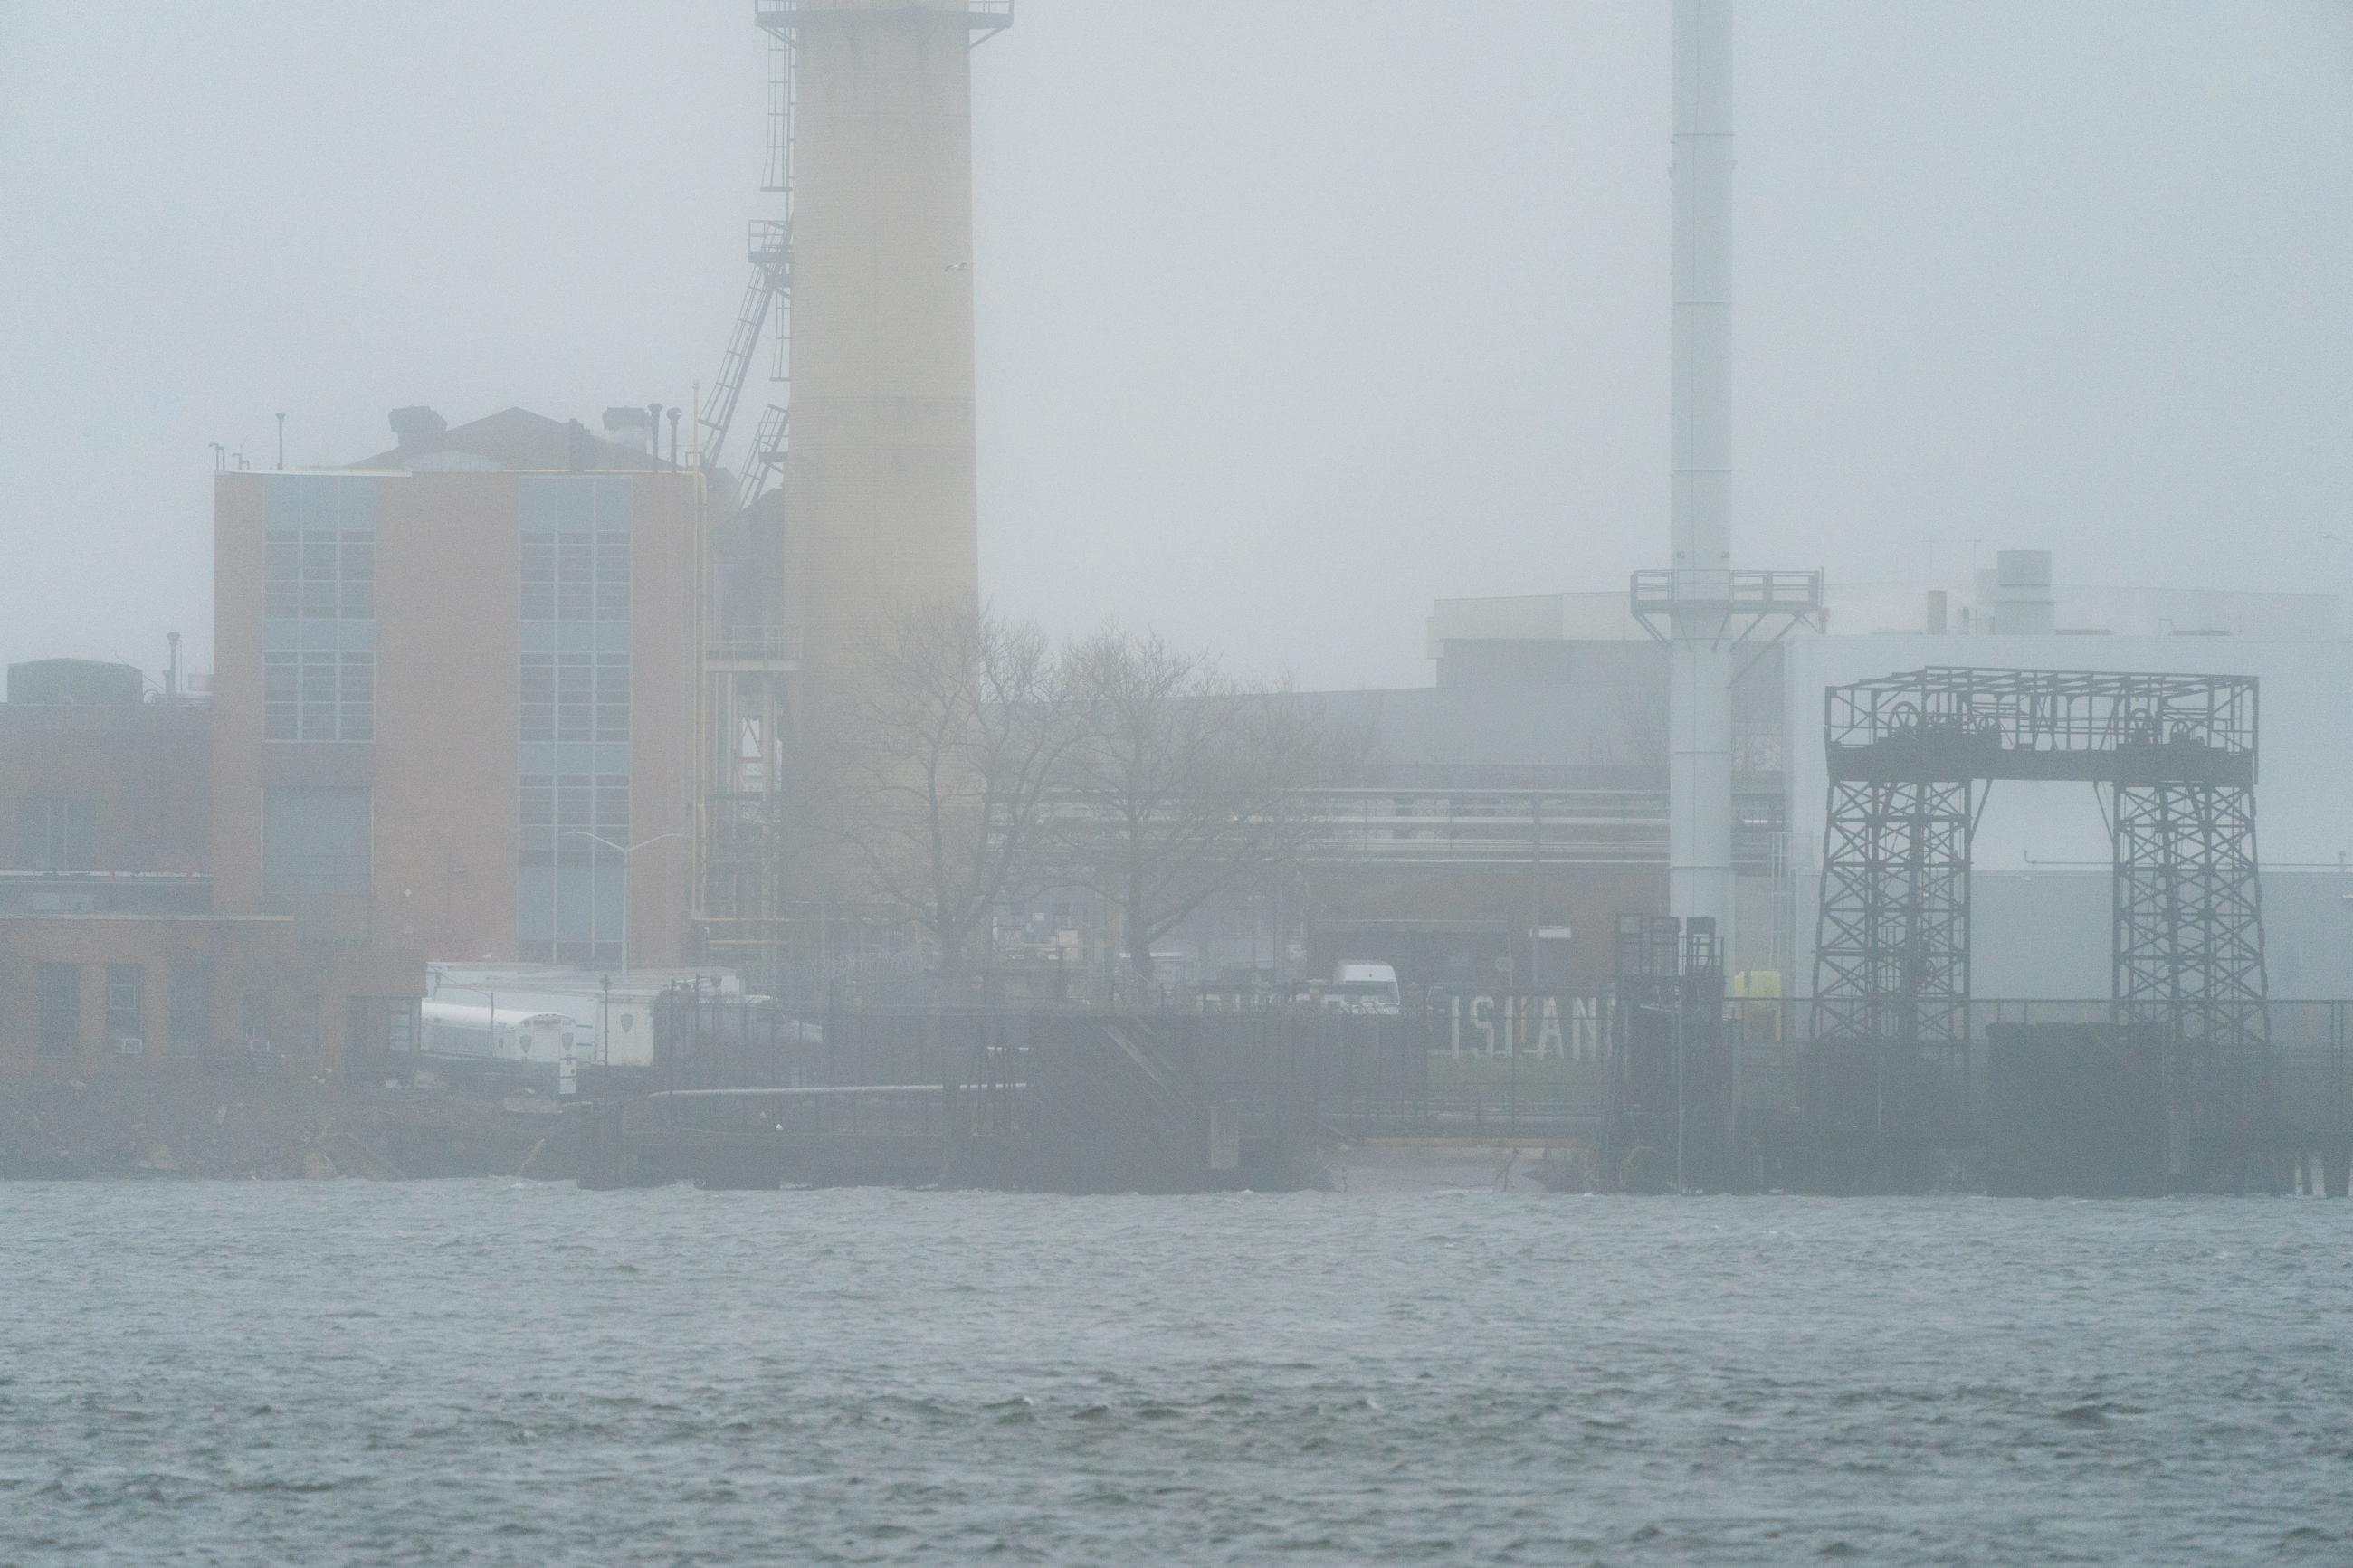 Rikers island is seen shrouded in fog during the outbreak of the coronavirus disease (COVID-19) in New York City, on March 29, 2020. 